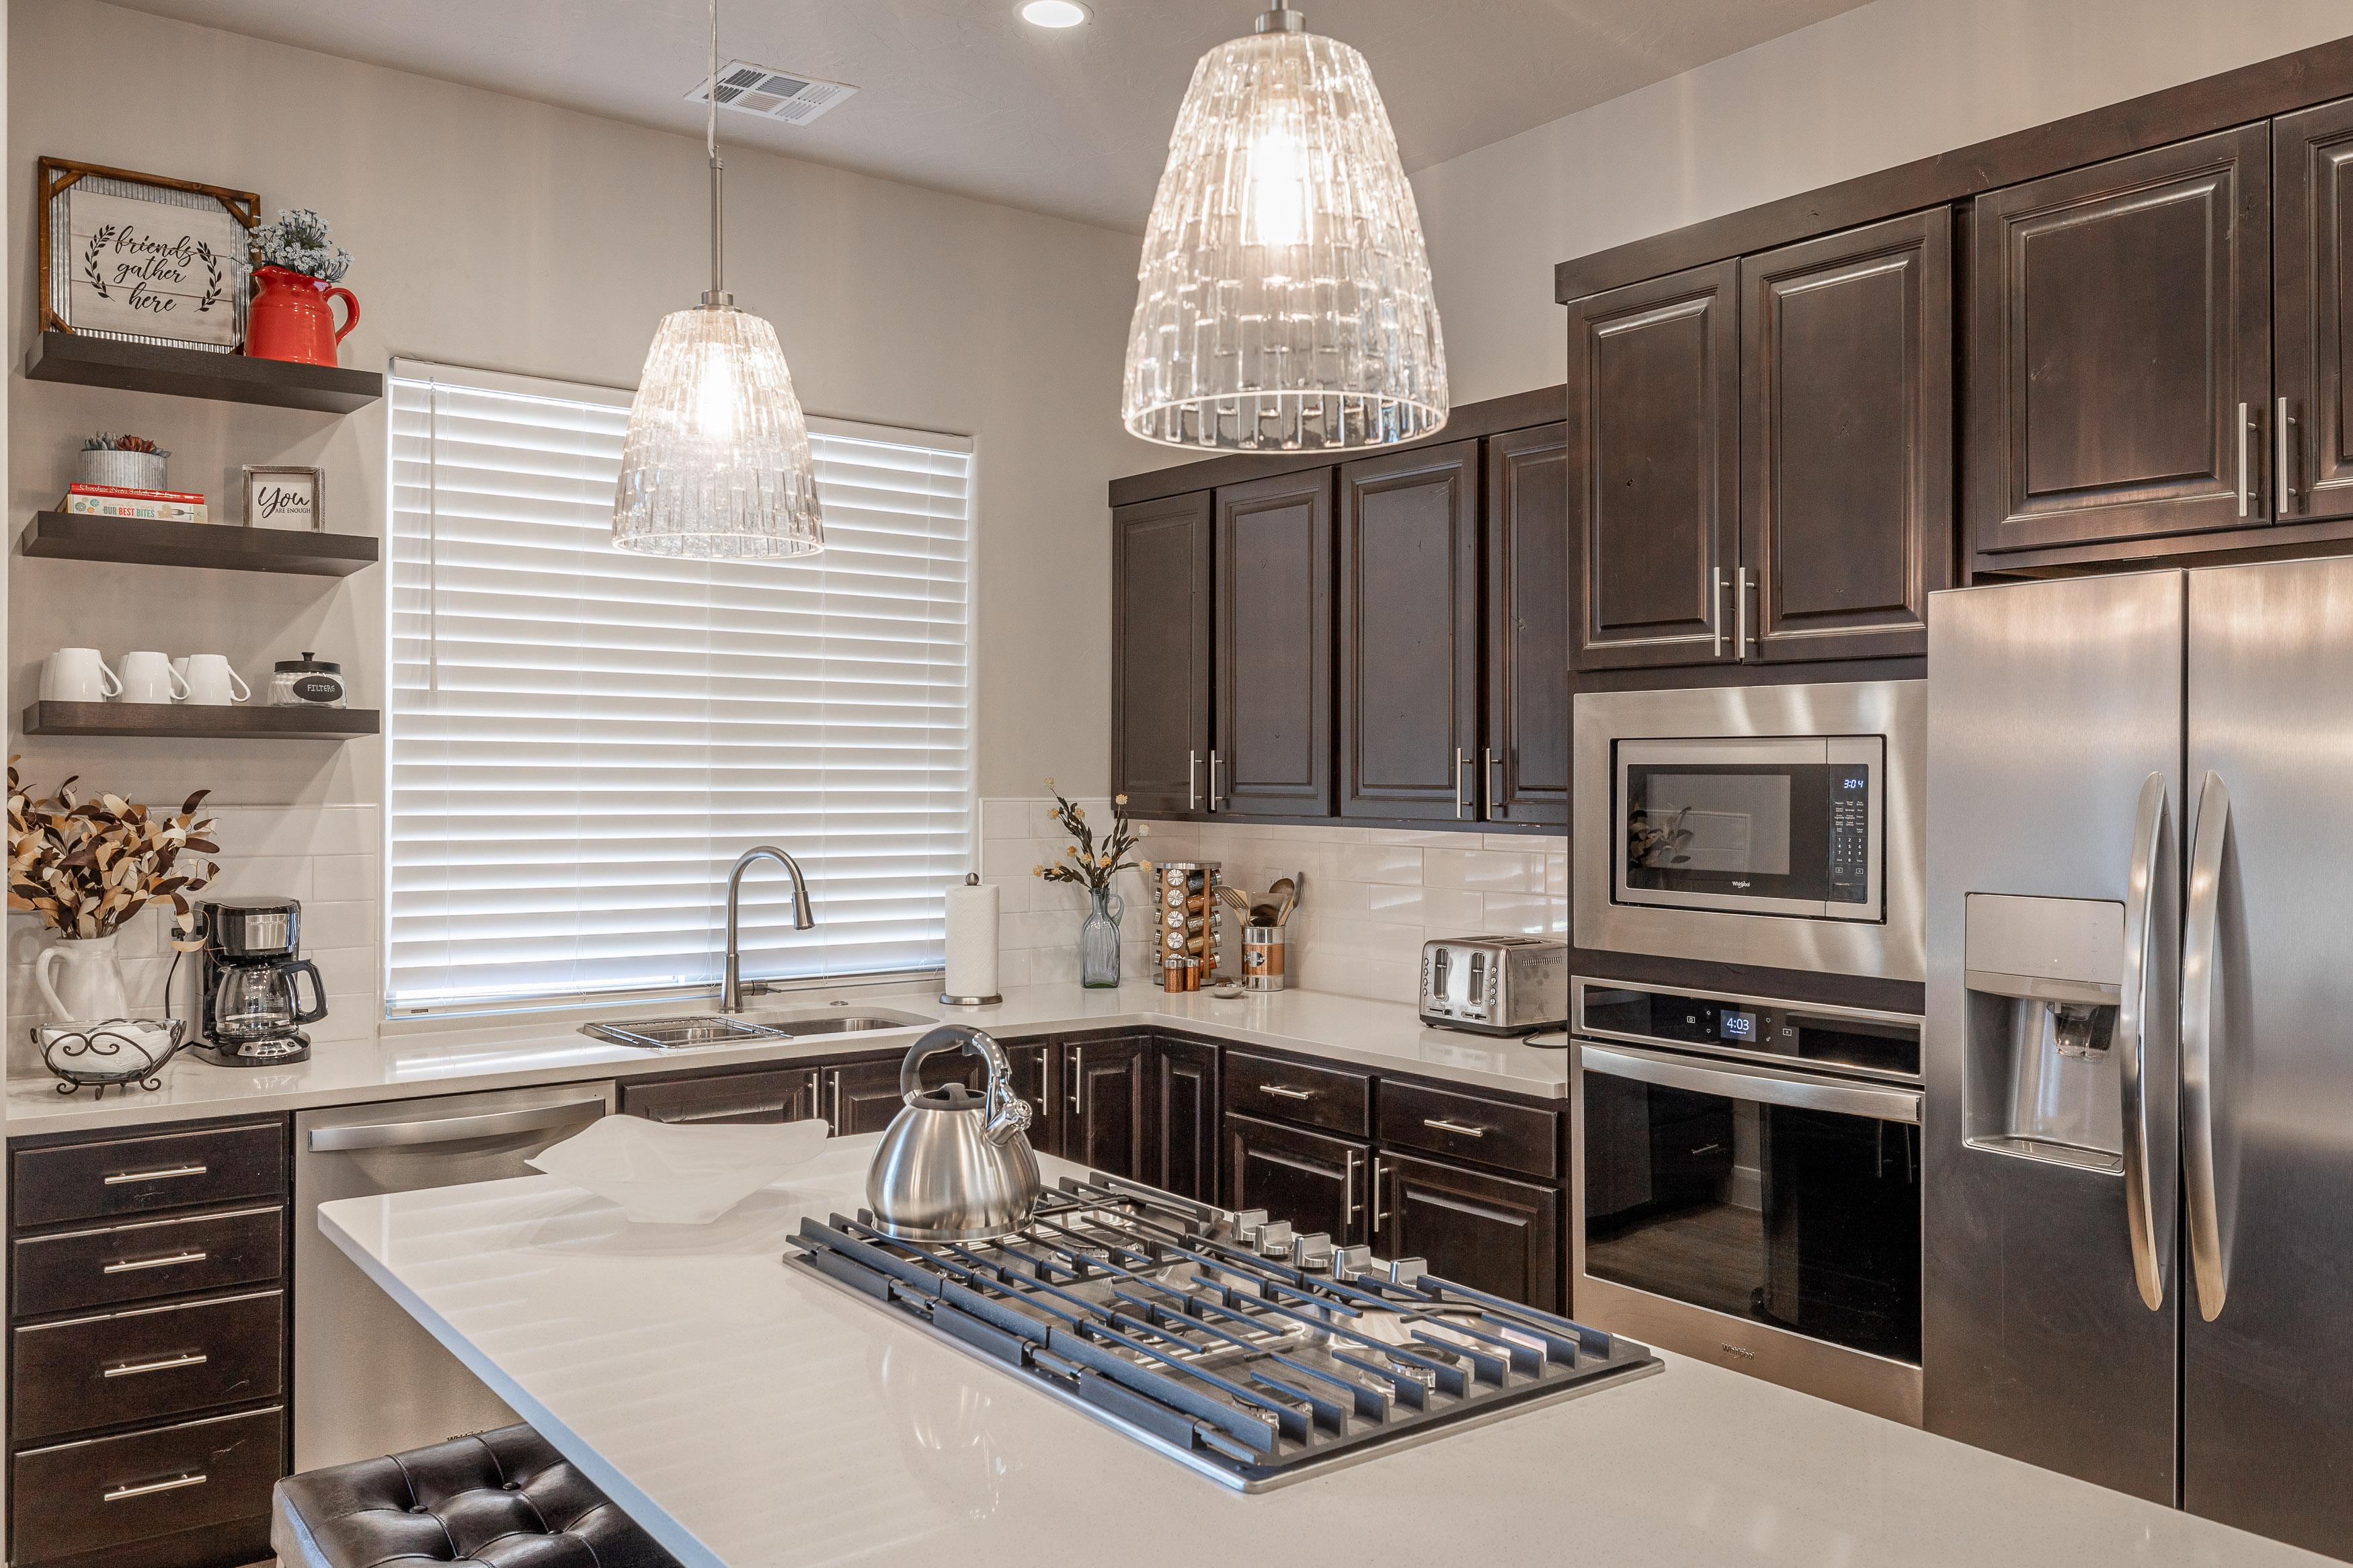 The kitchen is fully stocked with all the dishes, cookware, baking pans, and cutlery you will need for meal preparations and includes stainless steel appliances and granite counter tops. 